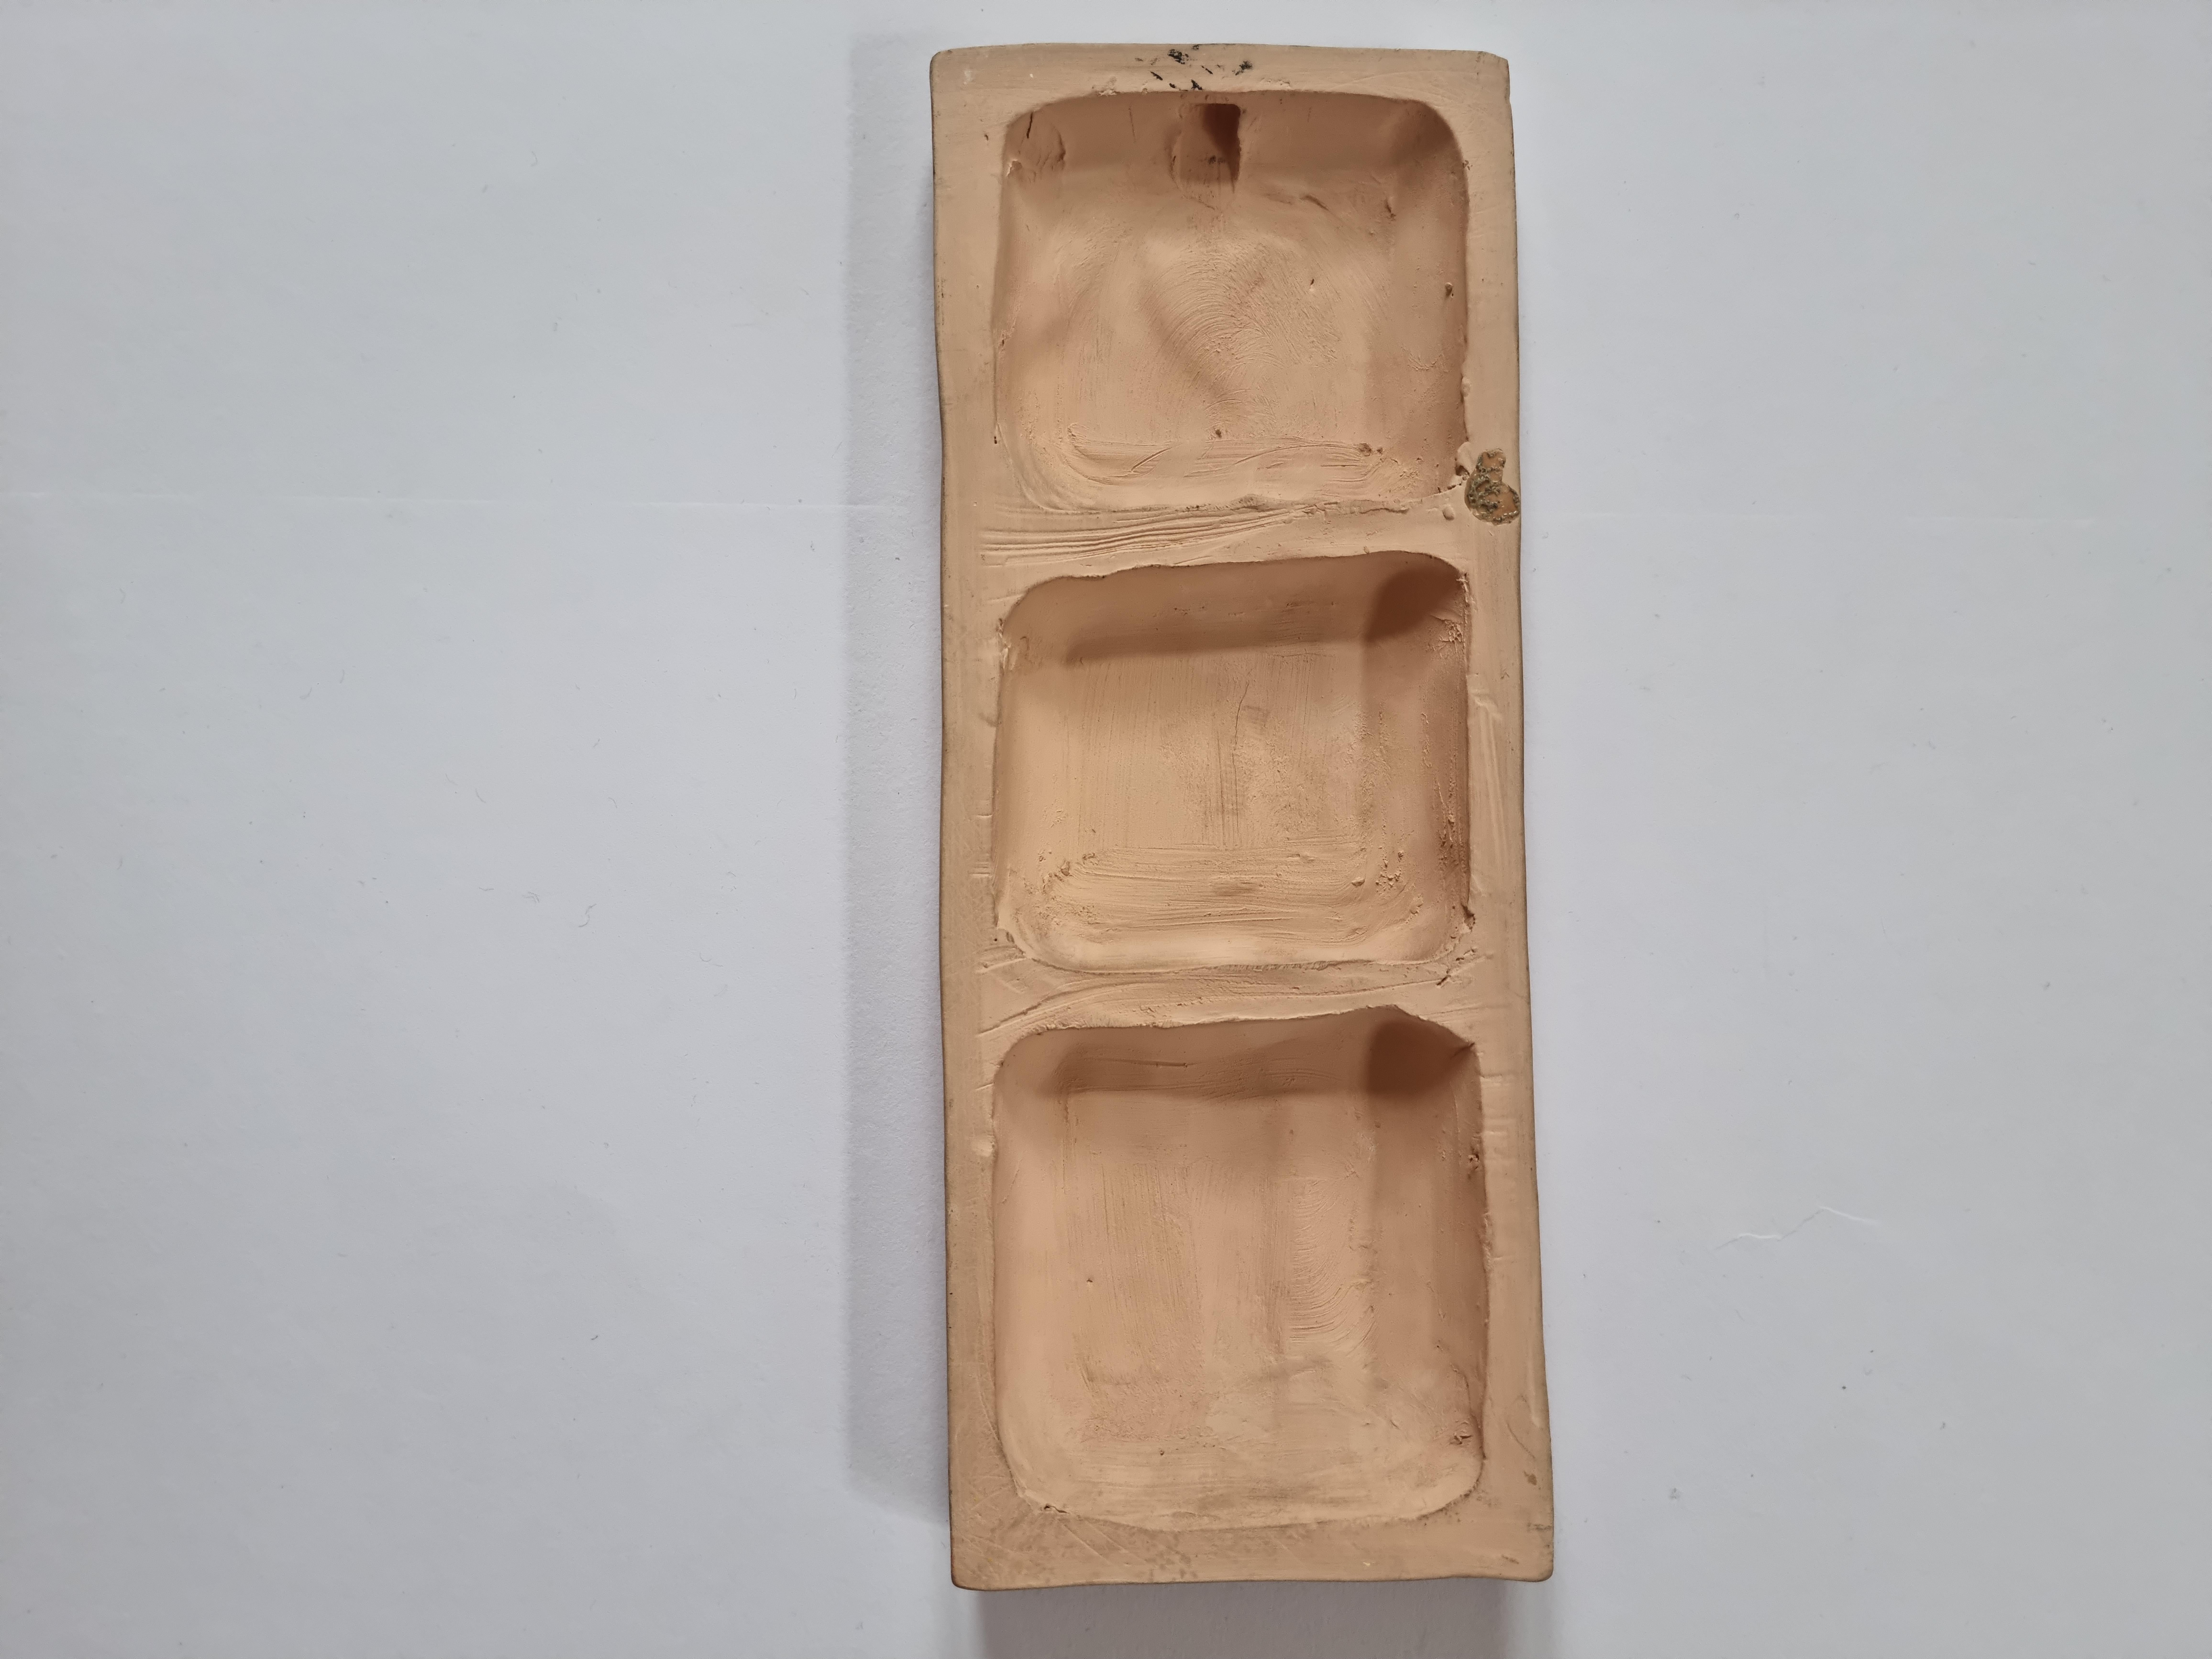 Rare Midcentury Ceramic Wall Sculpture Lovers, 1970s For Sale 1